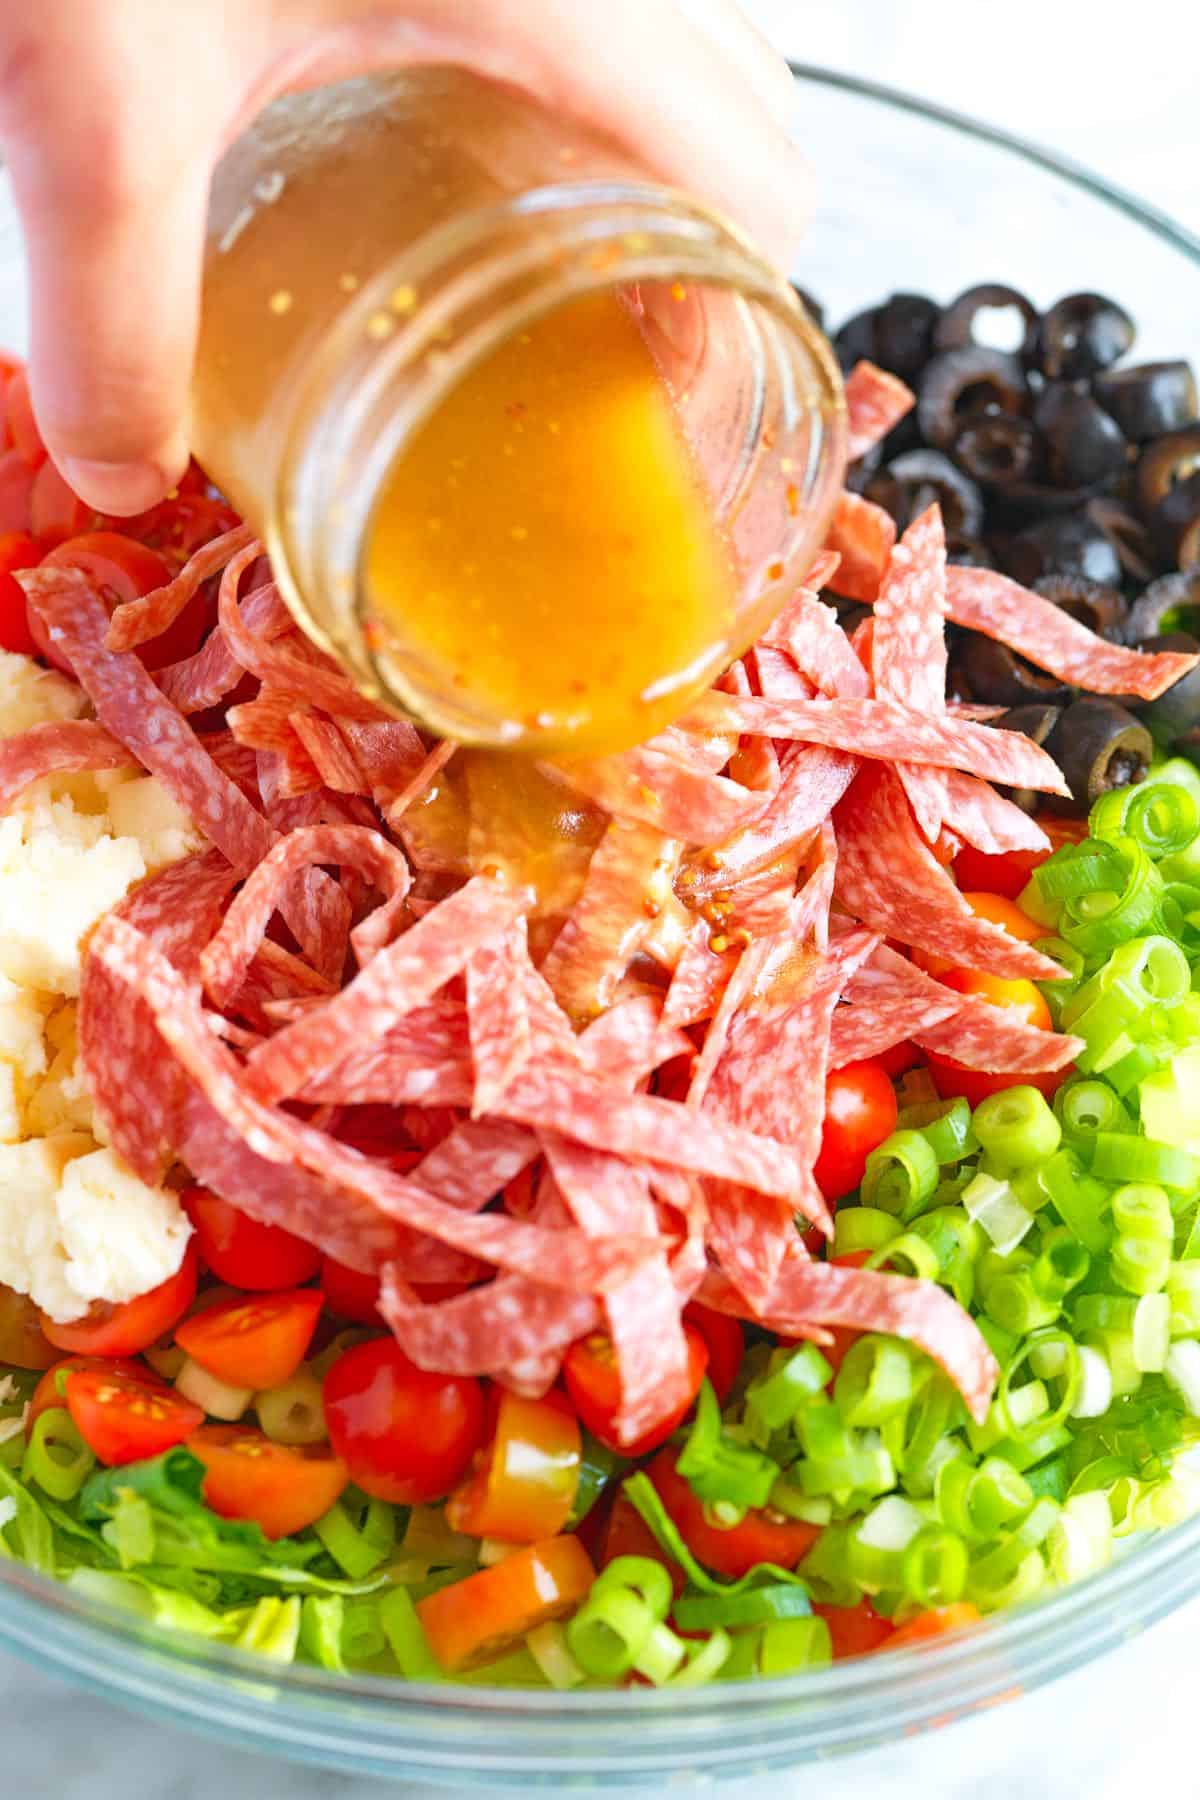 Pouring the red wine vinegar salad dressing over our Italian chopped salad.